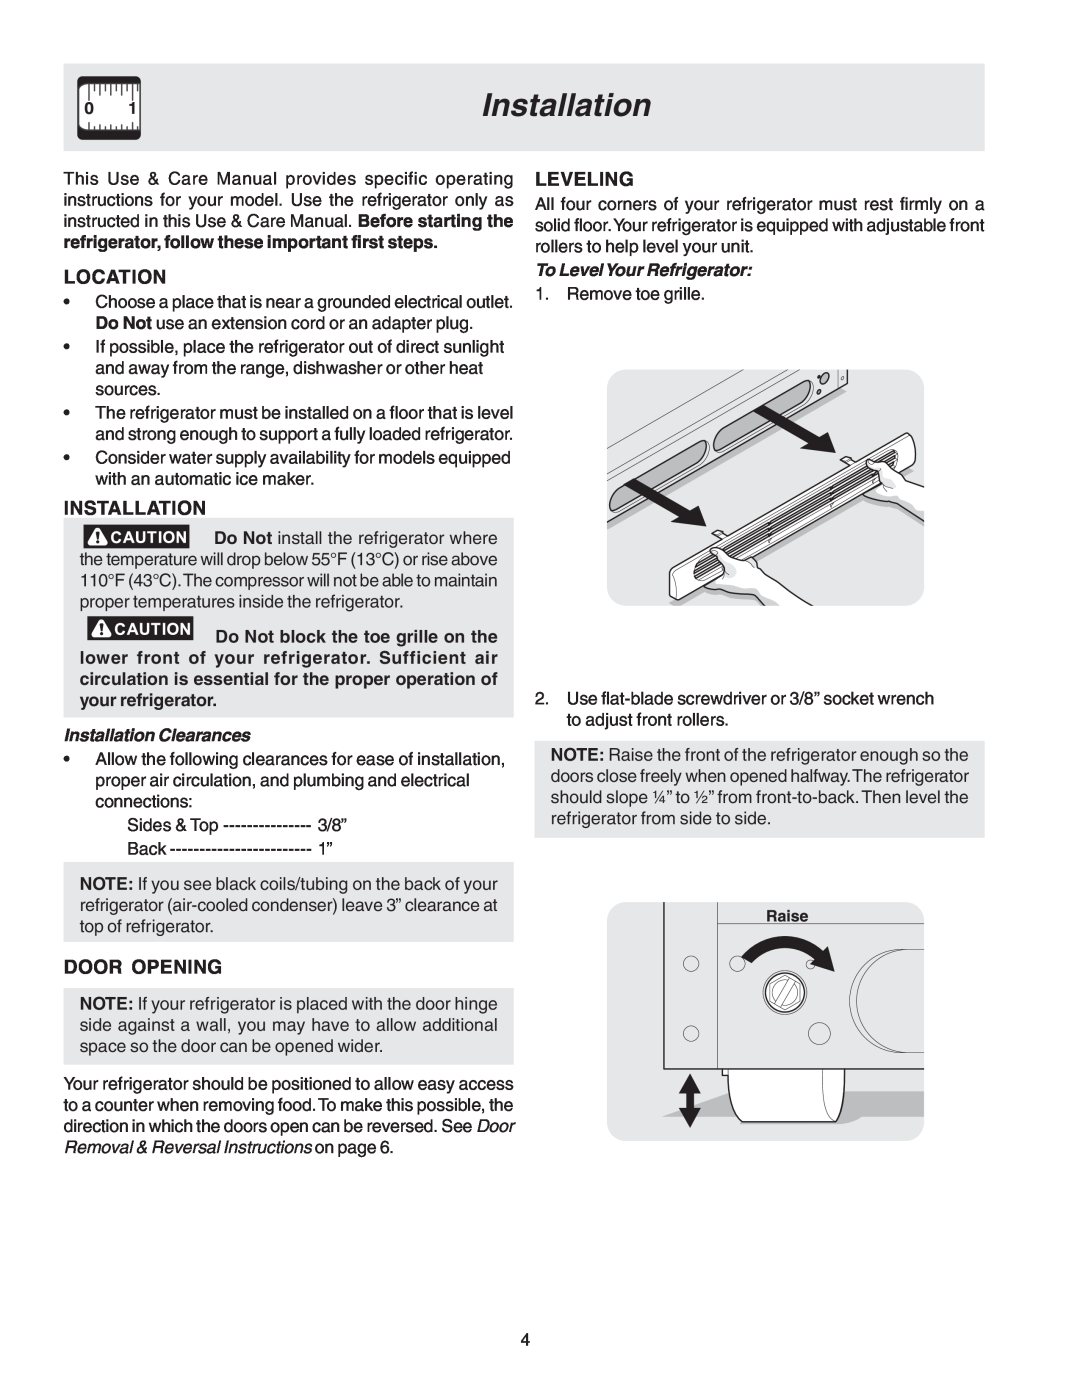 Crosley 241559900 manual Location, Door Opening, Leveling, Installation Clearances, To LevelYour Refrigerator 